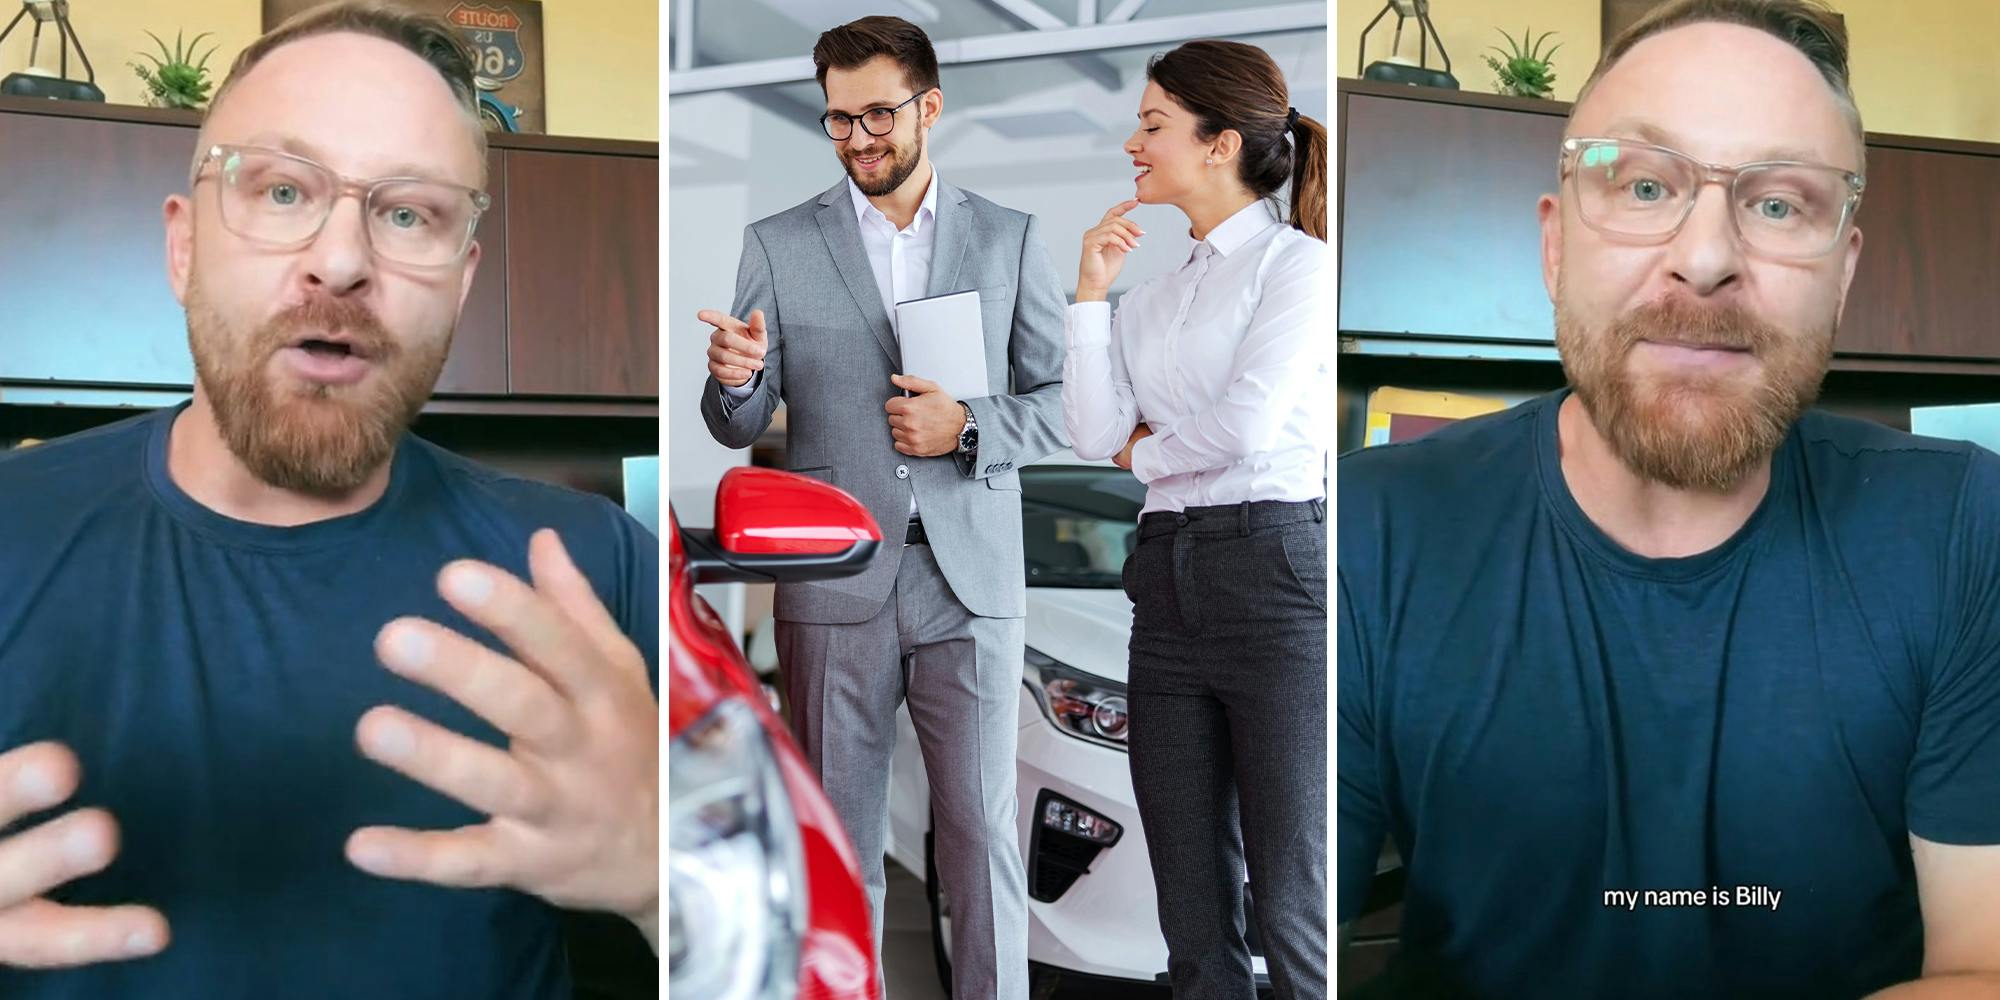 Car sales expert shares the 5 questions car dealerships